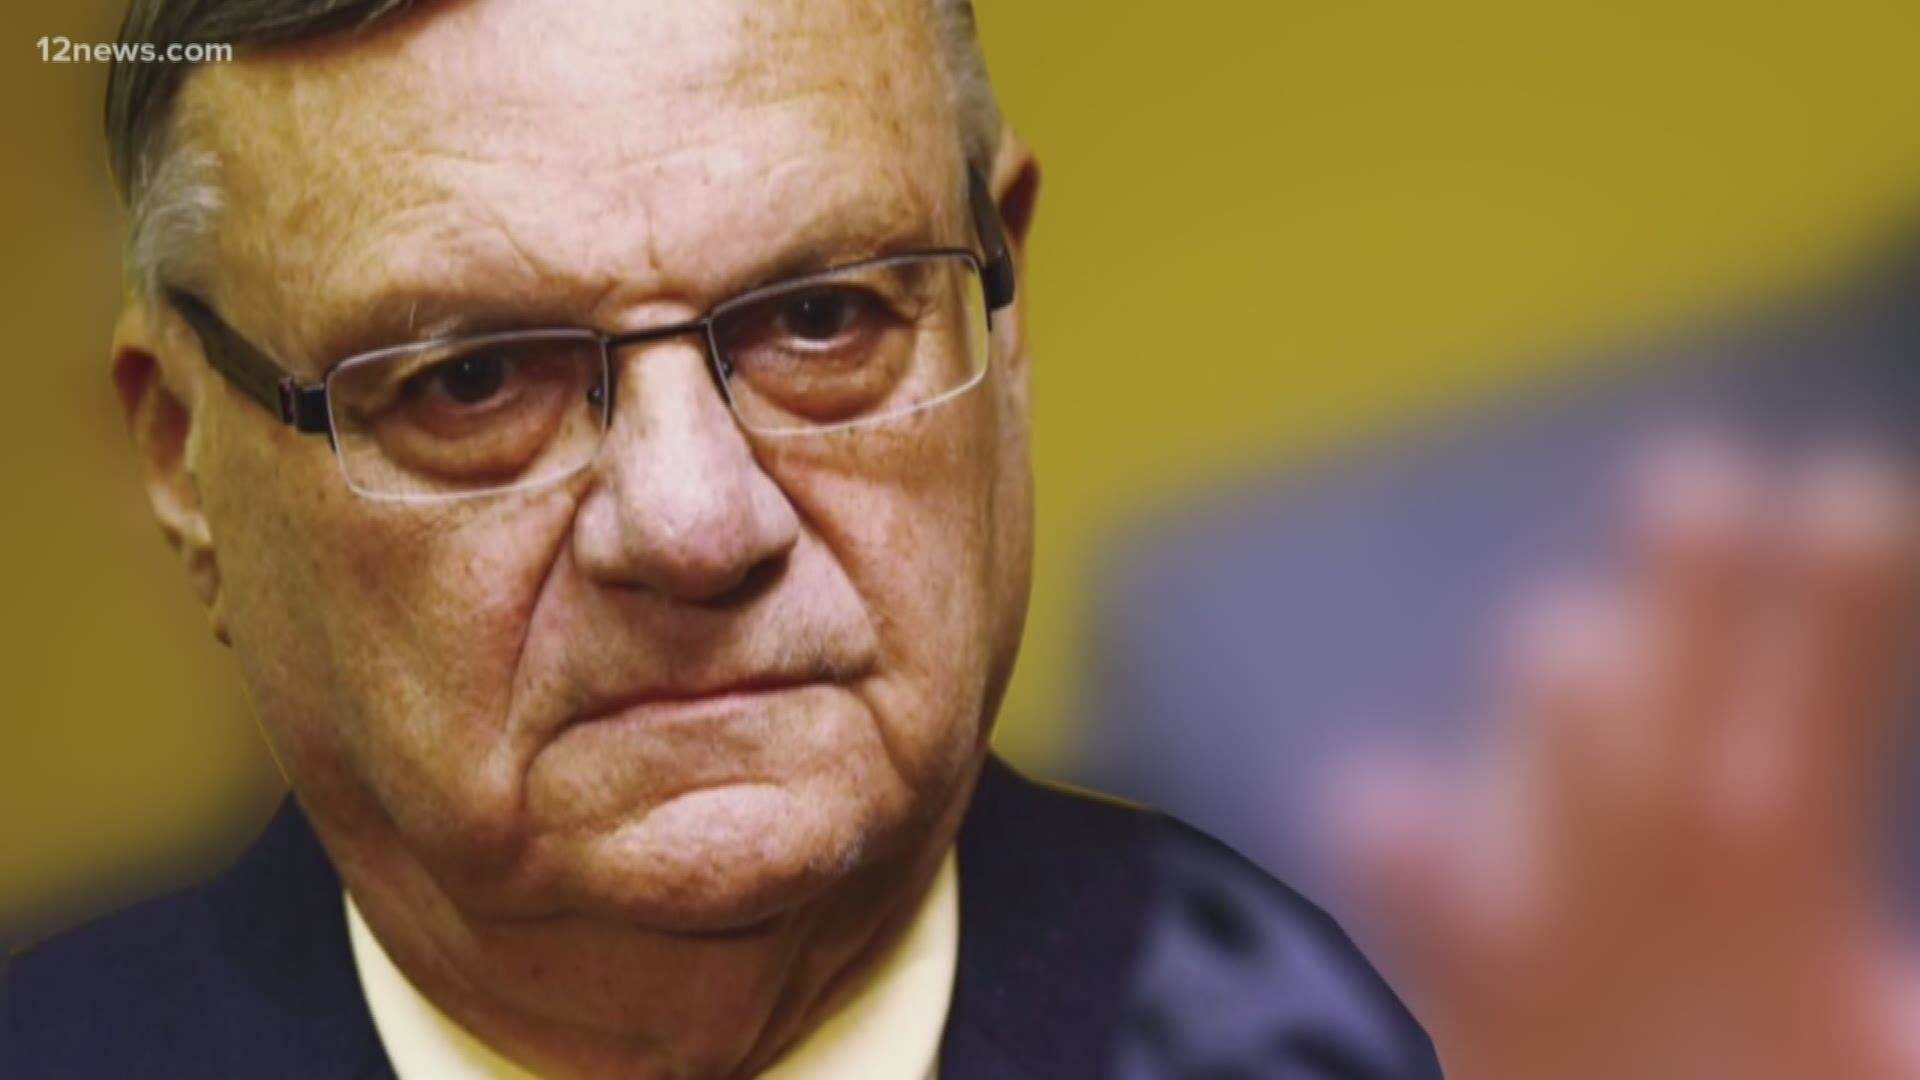 Former Maricopa County Sheriff Joe Arpaio lost his bid to toss out his criminal contempt conviction.